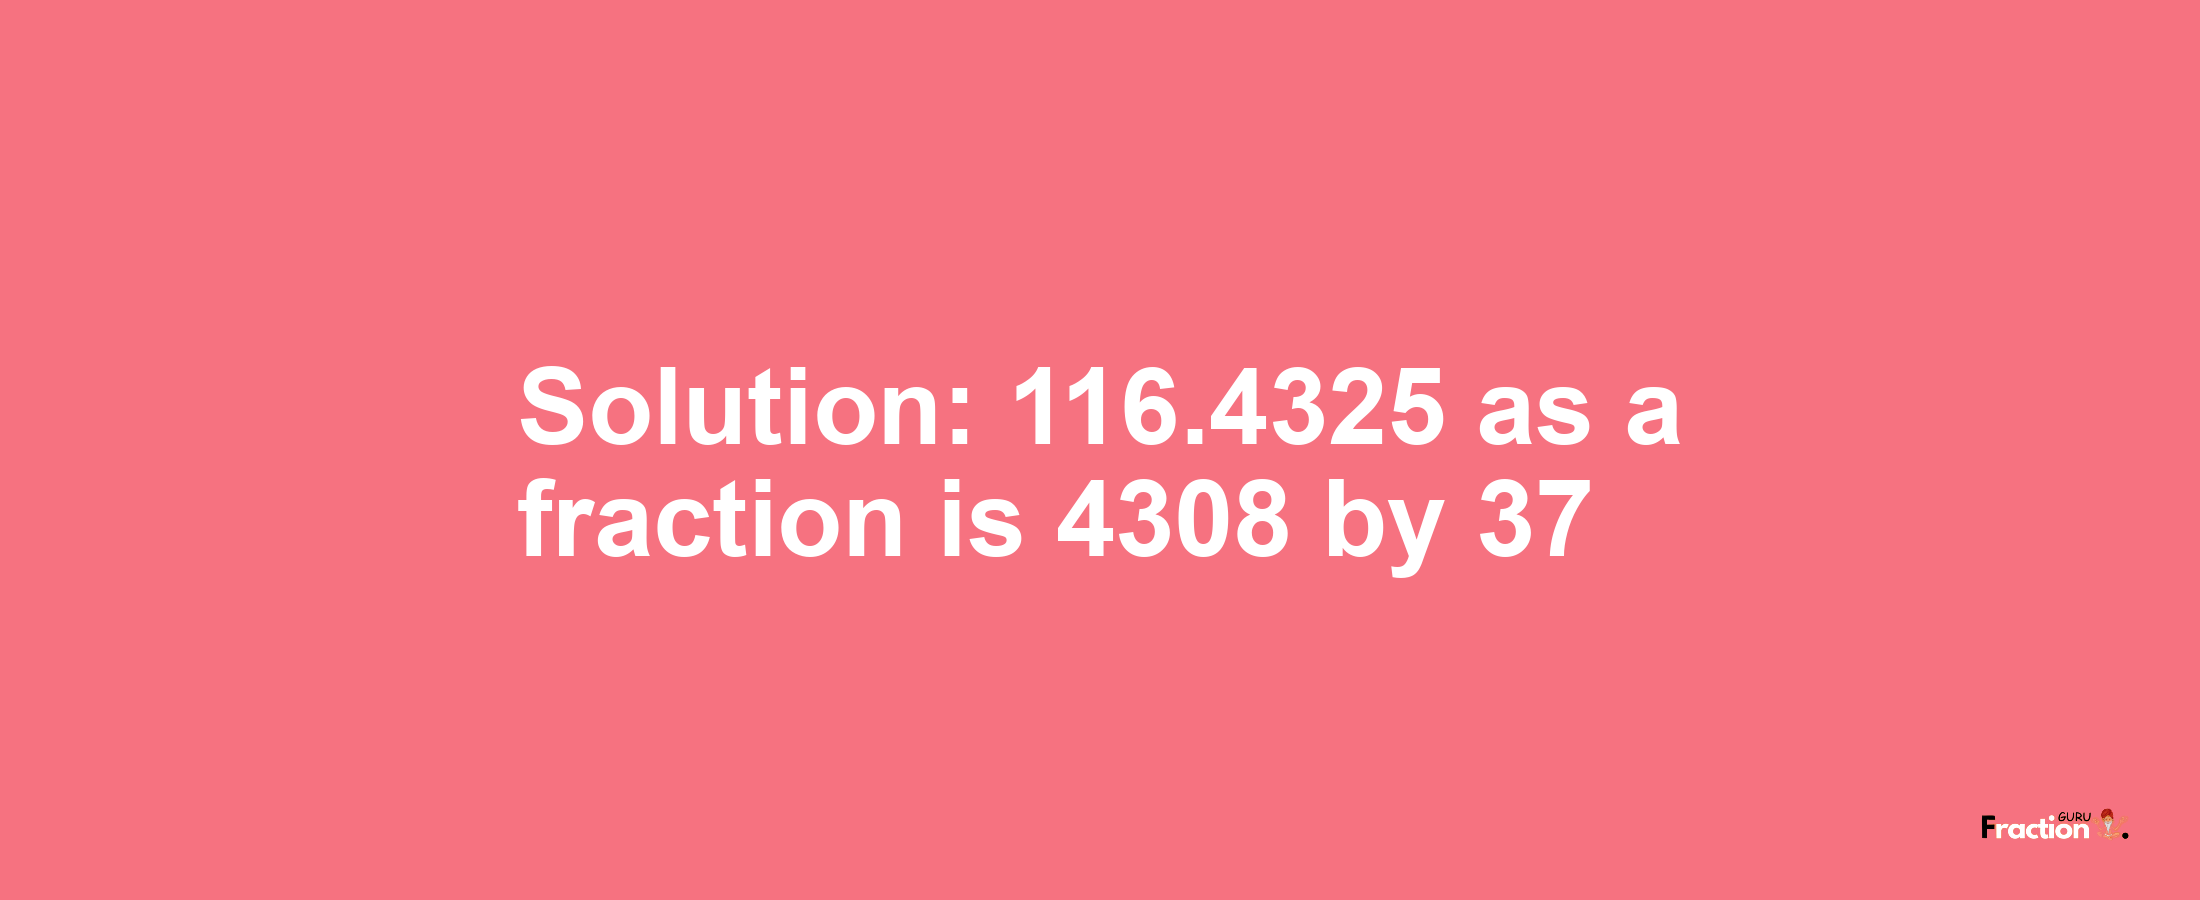 Solution:116.4325 as a fraction is 4308/37